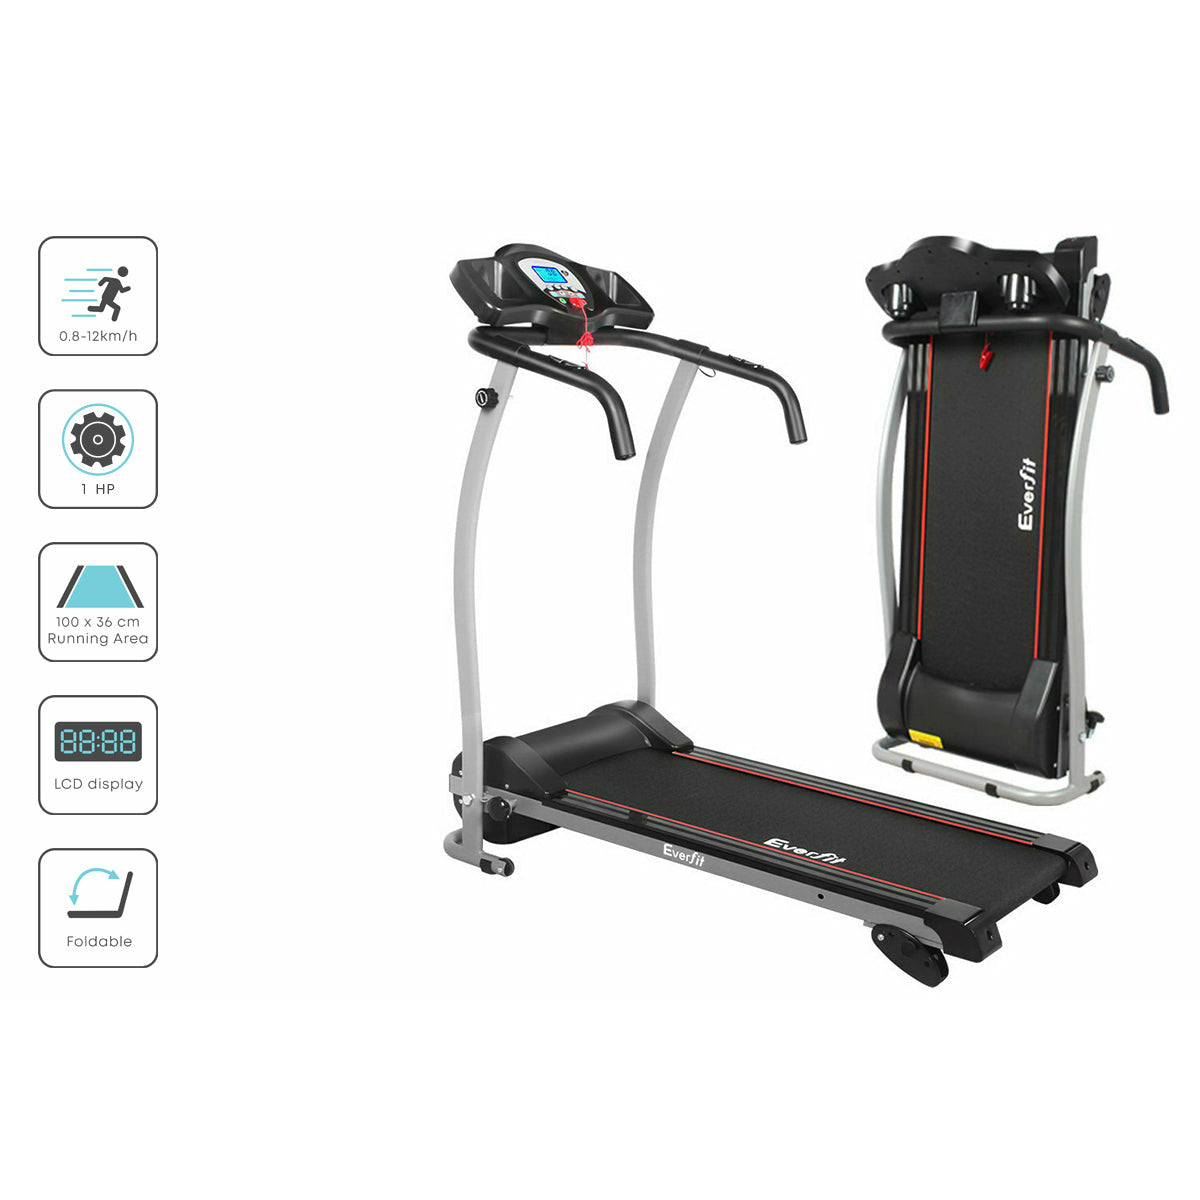 Everfit Electric Treadmill Home Gym Exercise Machine Fitness Equipment Physical 360mm